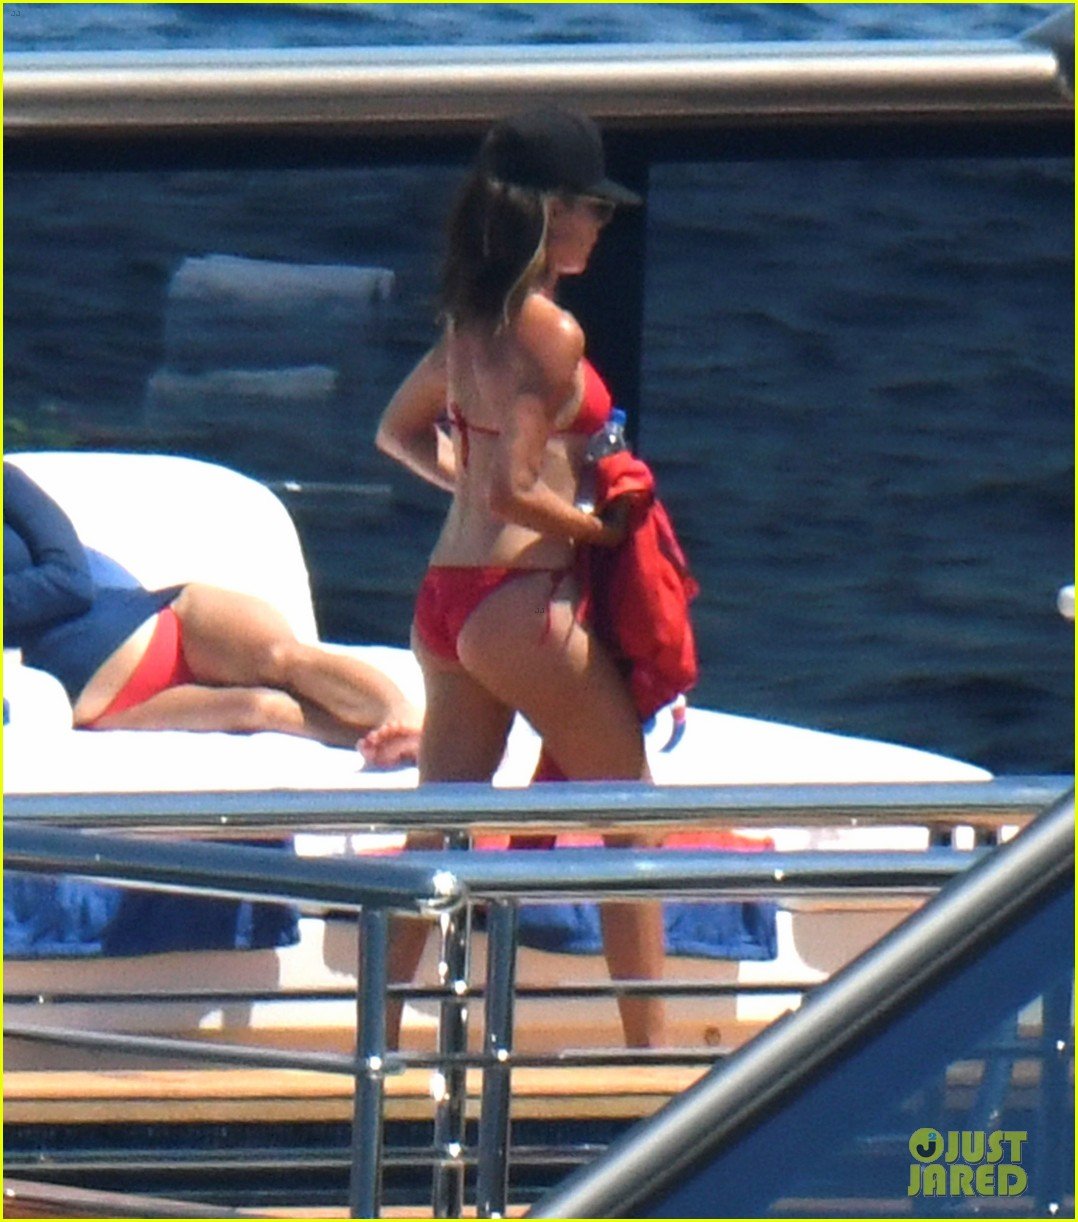 Victoria Beckham Wears Red Bikini as David Beckham Goes Jetskiing on Vacation in Italy: Photo 4792984 | Bikini, David Beckham, Romeo Beckham, Shirtless, Victoria Beckham Pictures | Just Jared